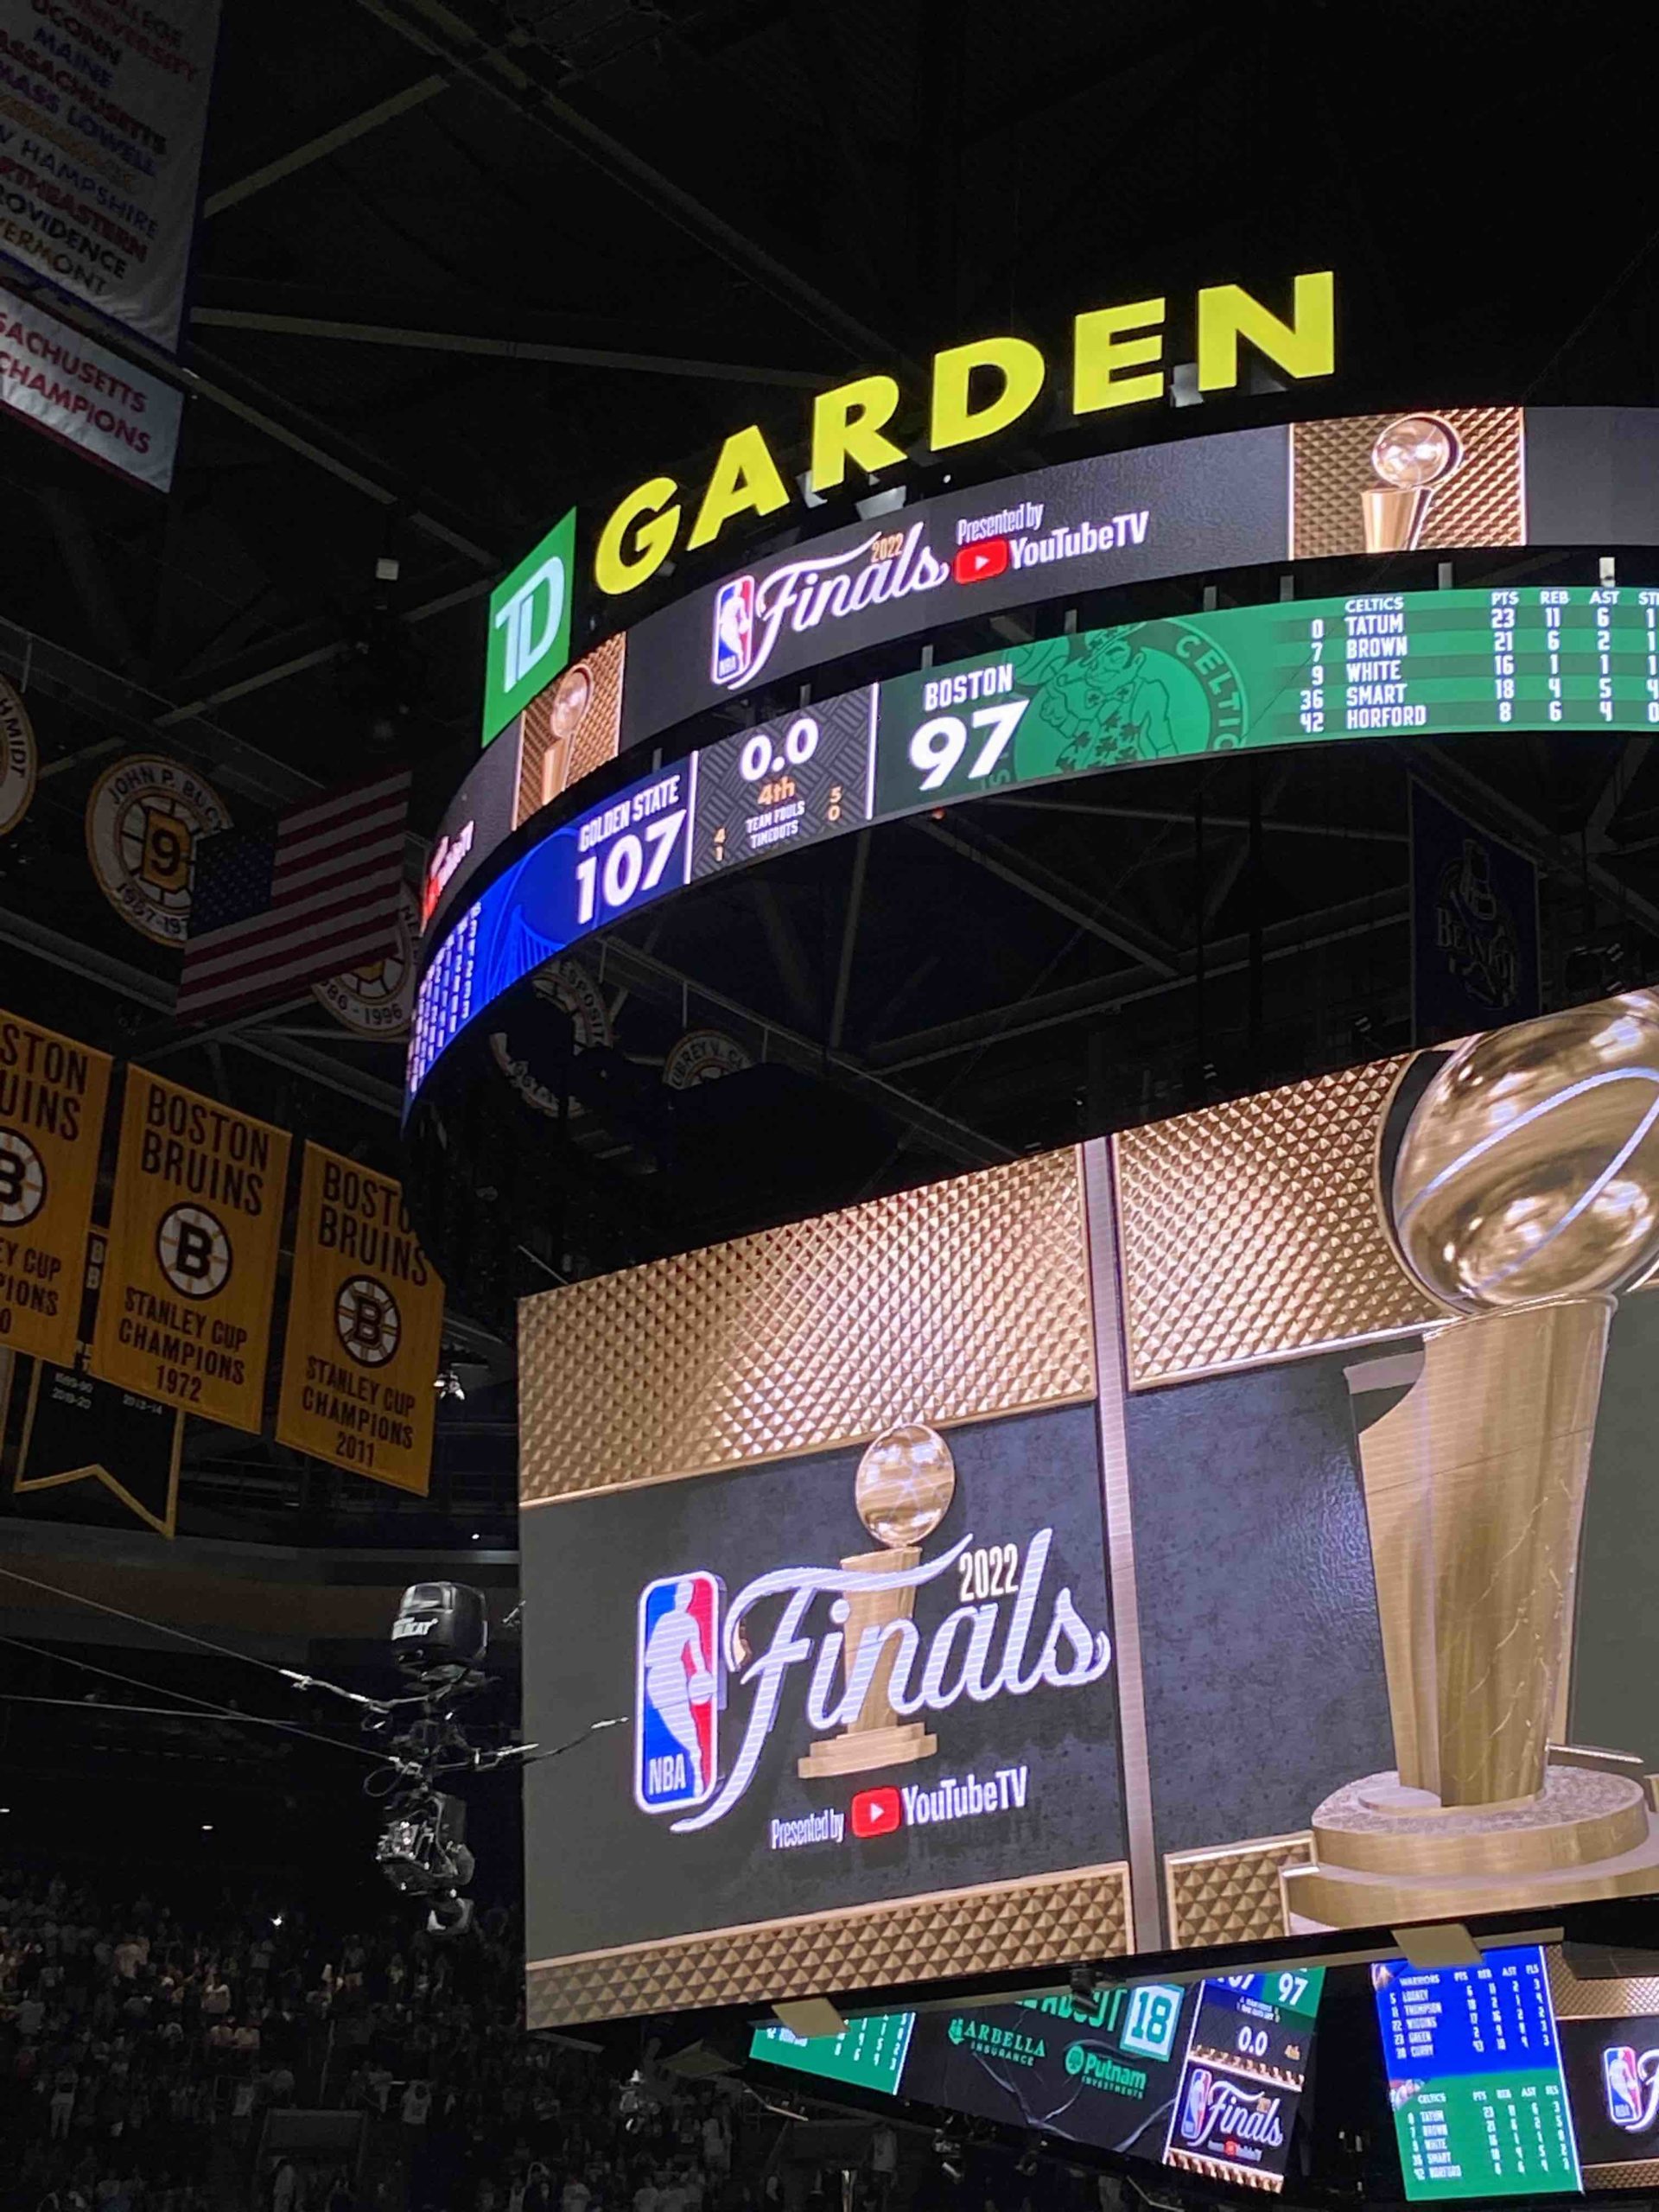 The final score at TD Garden for Game 4.